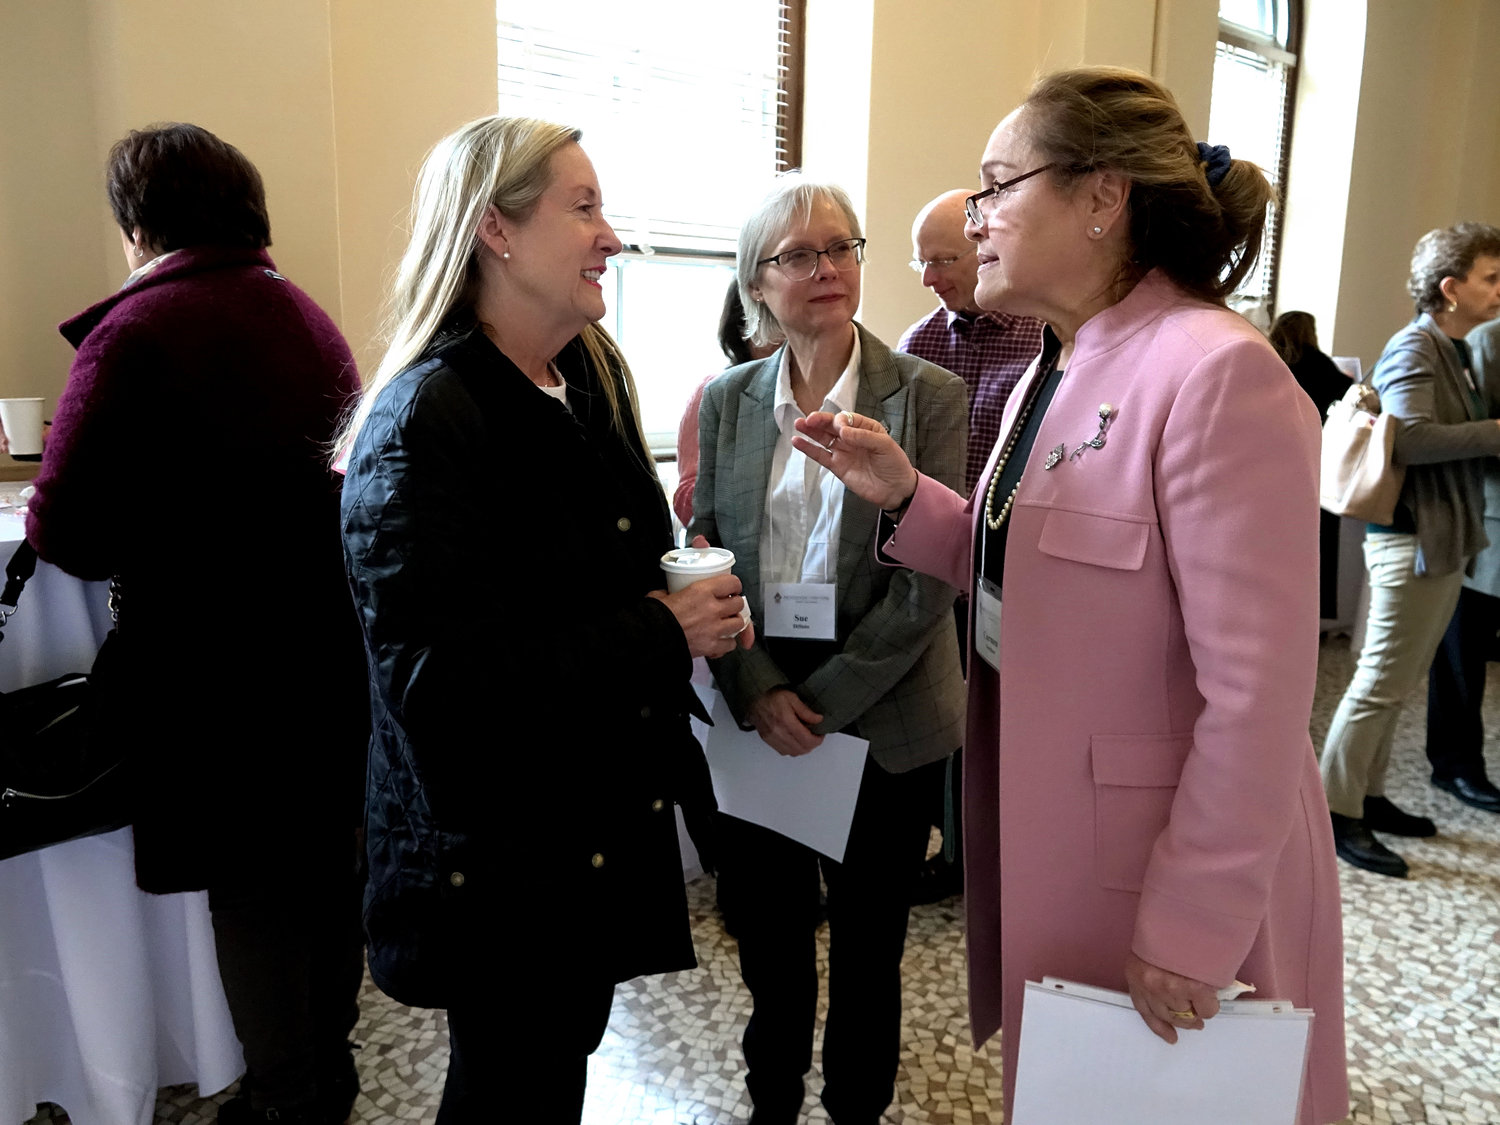 Attendee Marypat Hughes, left, converses with representatives from the Family Life Office, Sue DiSisto and Carmen Noschese, far right.